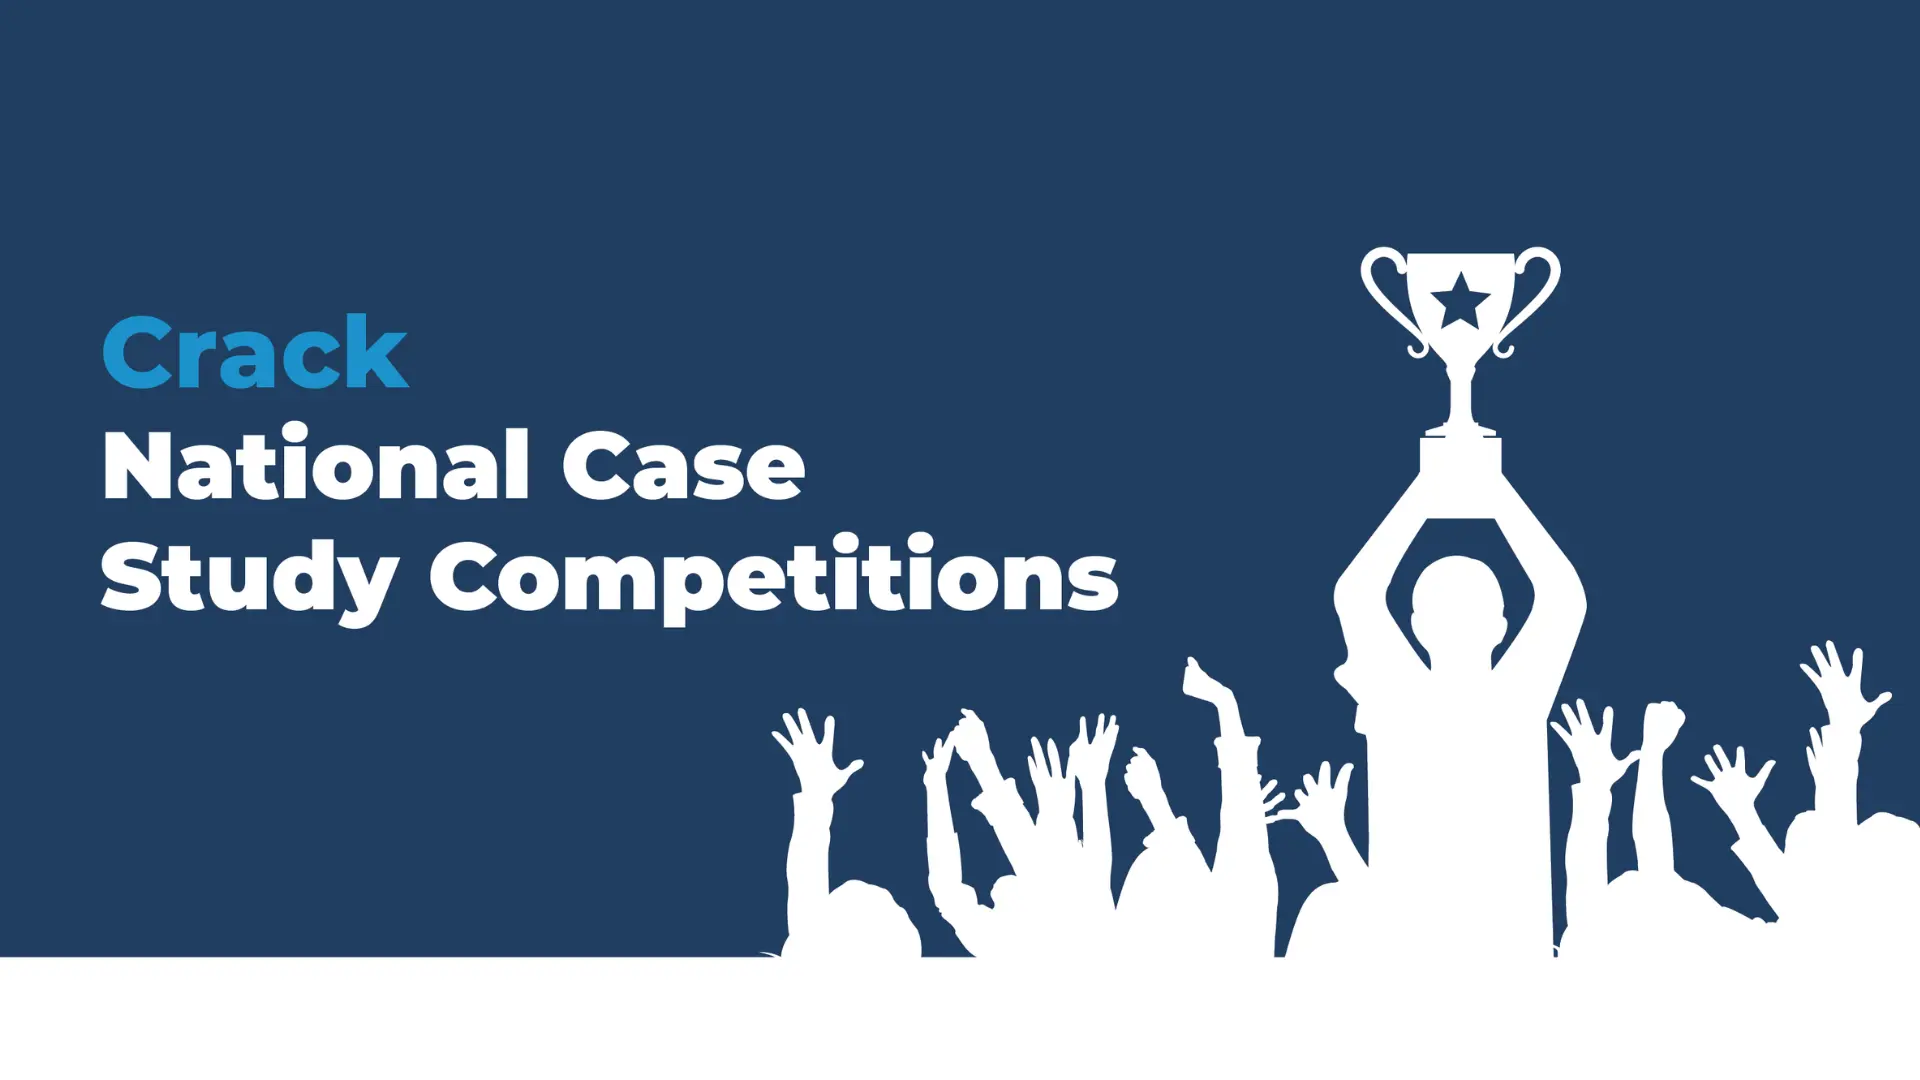 How to Win Case Study Competitions While Having Fun?